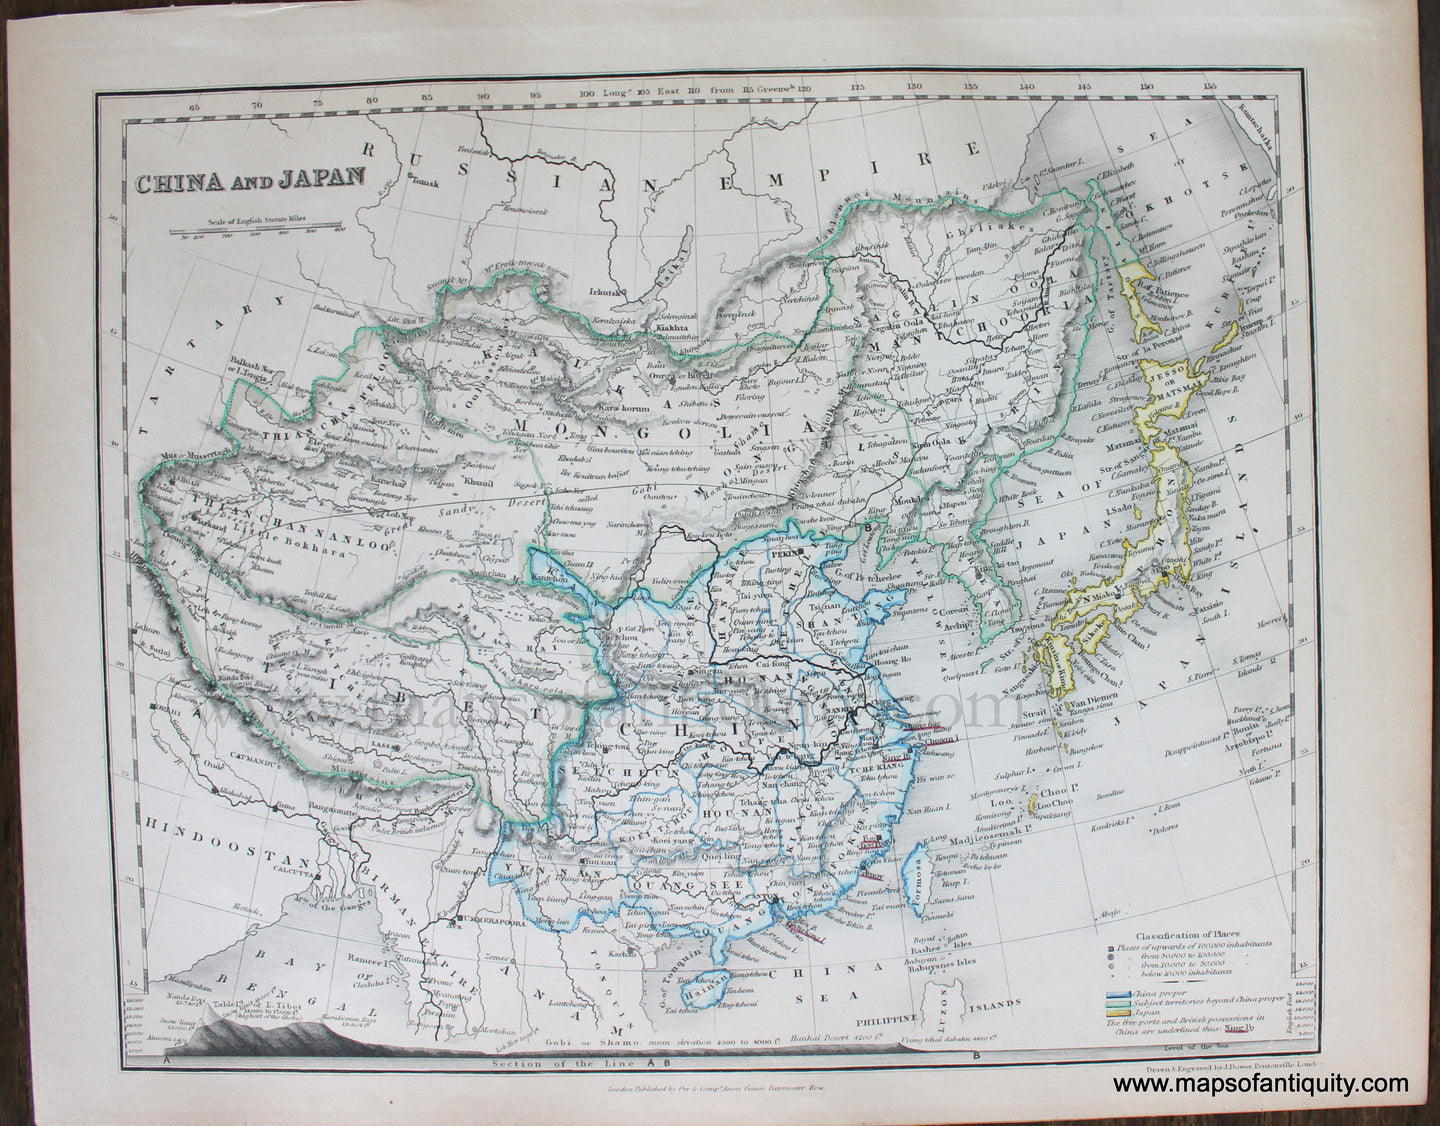 Genuine-Antique-Map-China-and-Japan-Asia--1850-Petermann-/-Orr-/-Dower-Maps-Of-Antiquity-1800s-19th-century